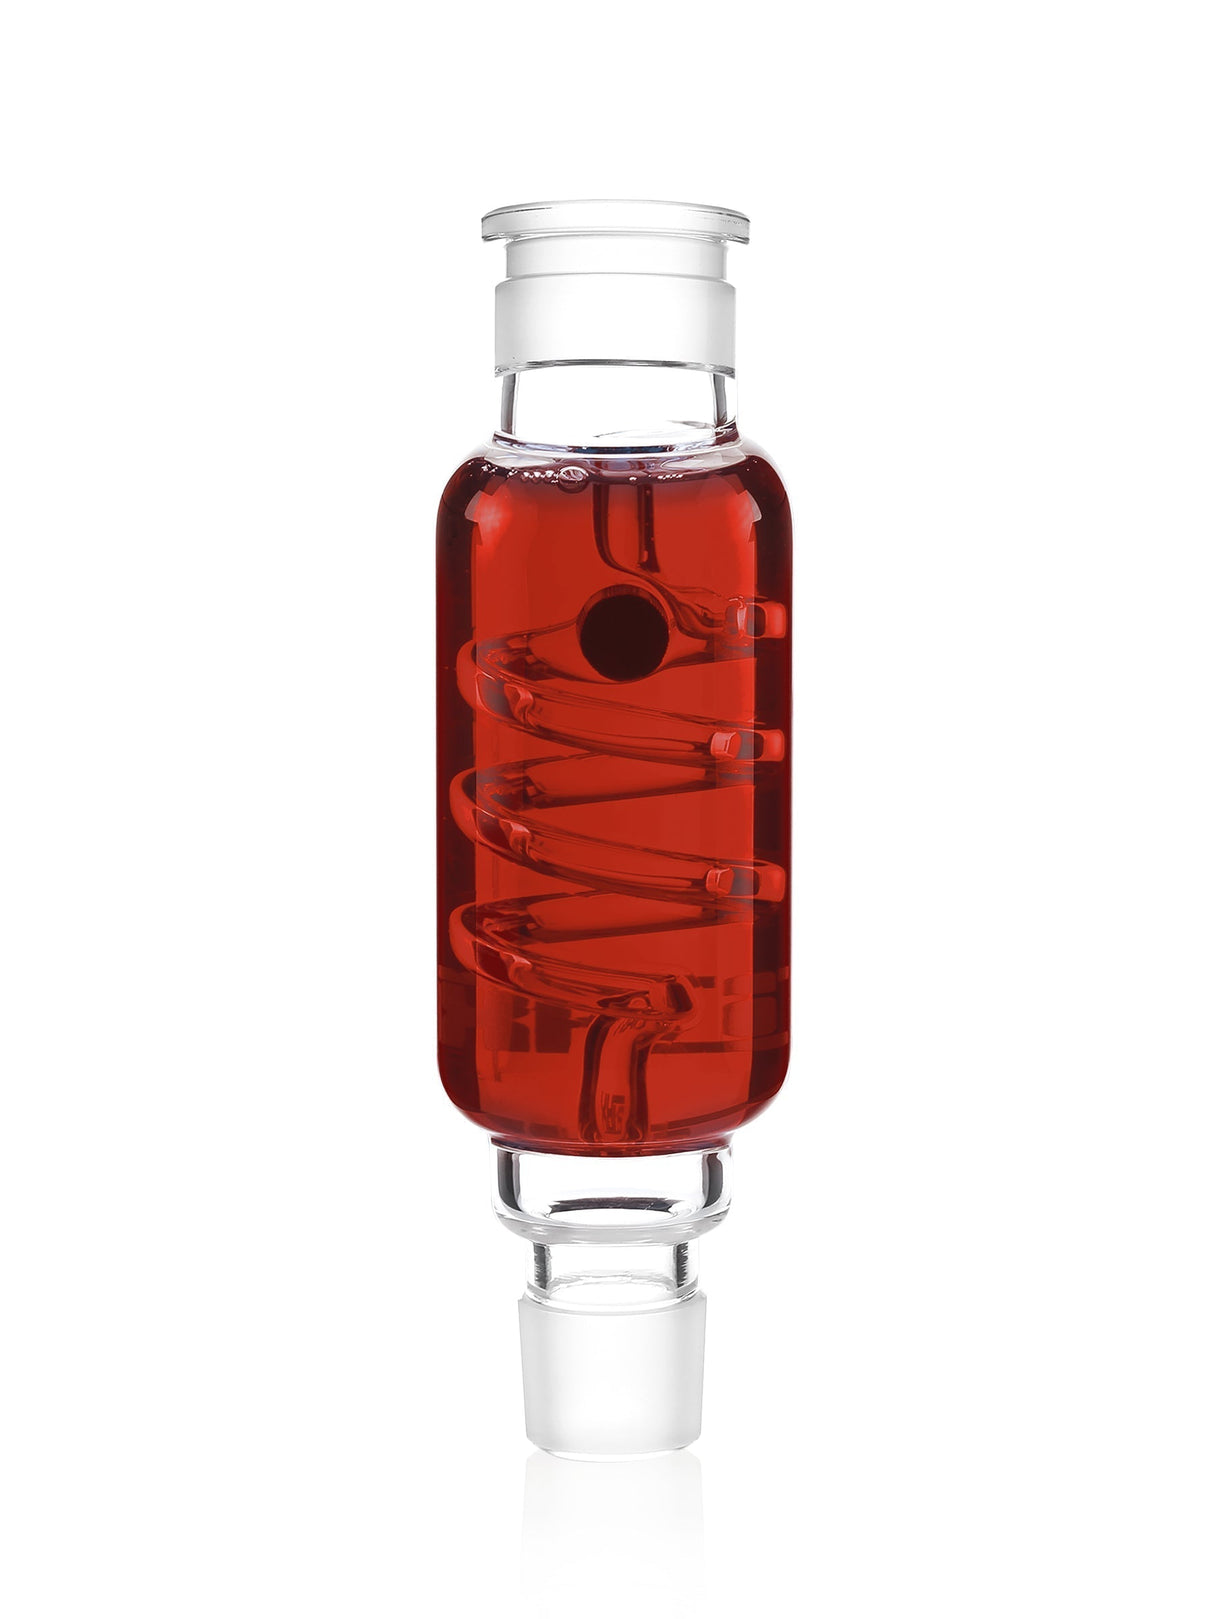 GRAV Stax Glycerin Coil in Red, 7" Borosilicate Glass Bong Part, Front View on White Background